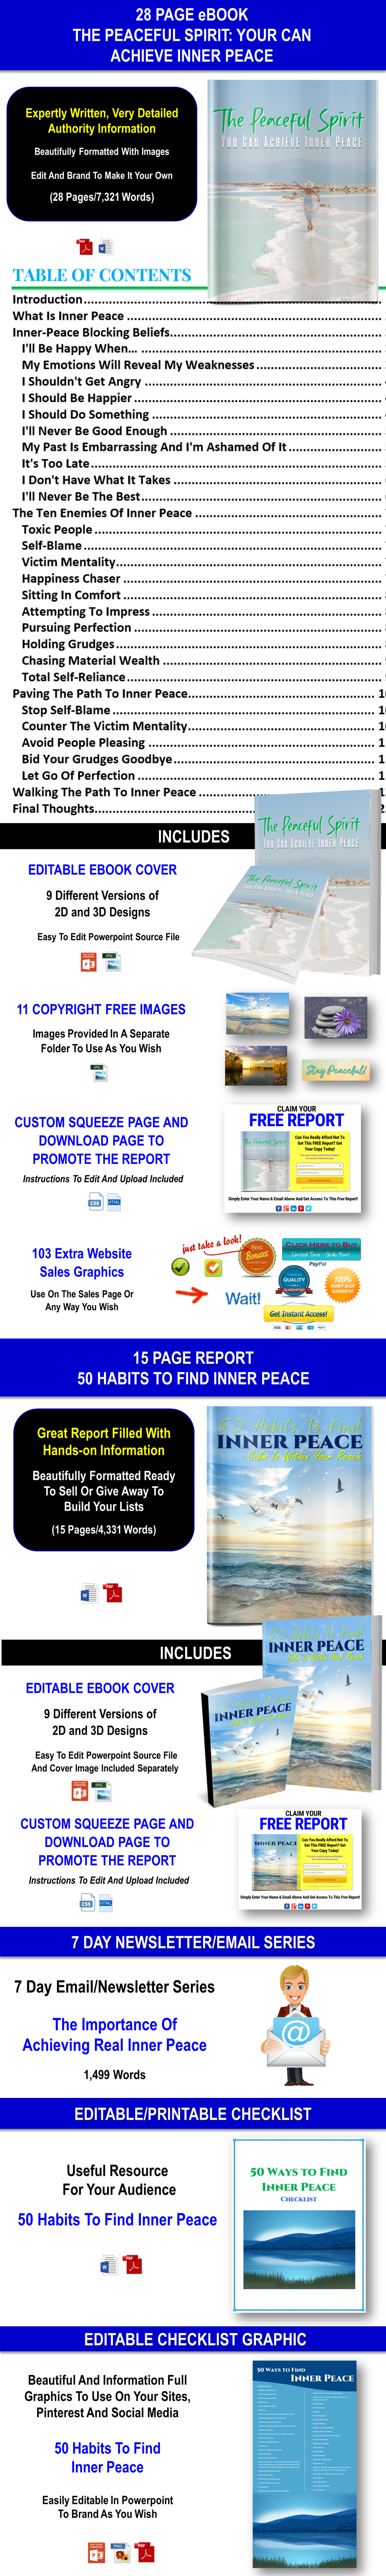 THE PEACEFUL SPIRIT - Achieving Inner Peace with PLR Rights